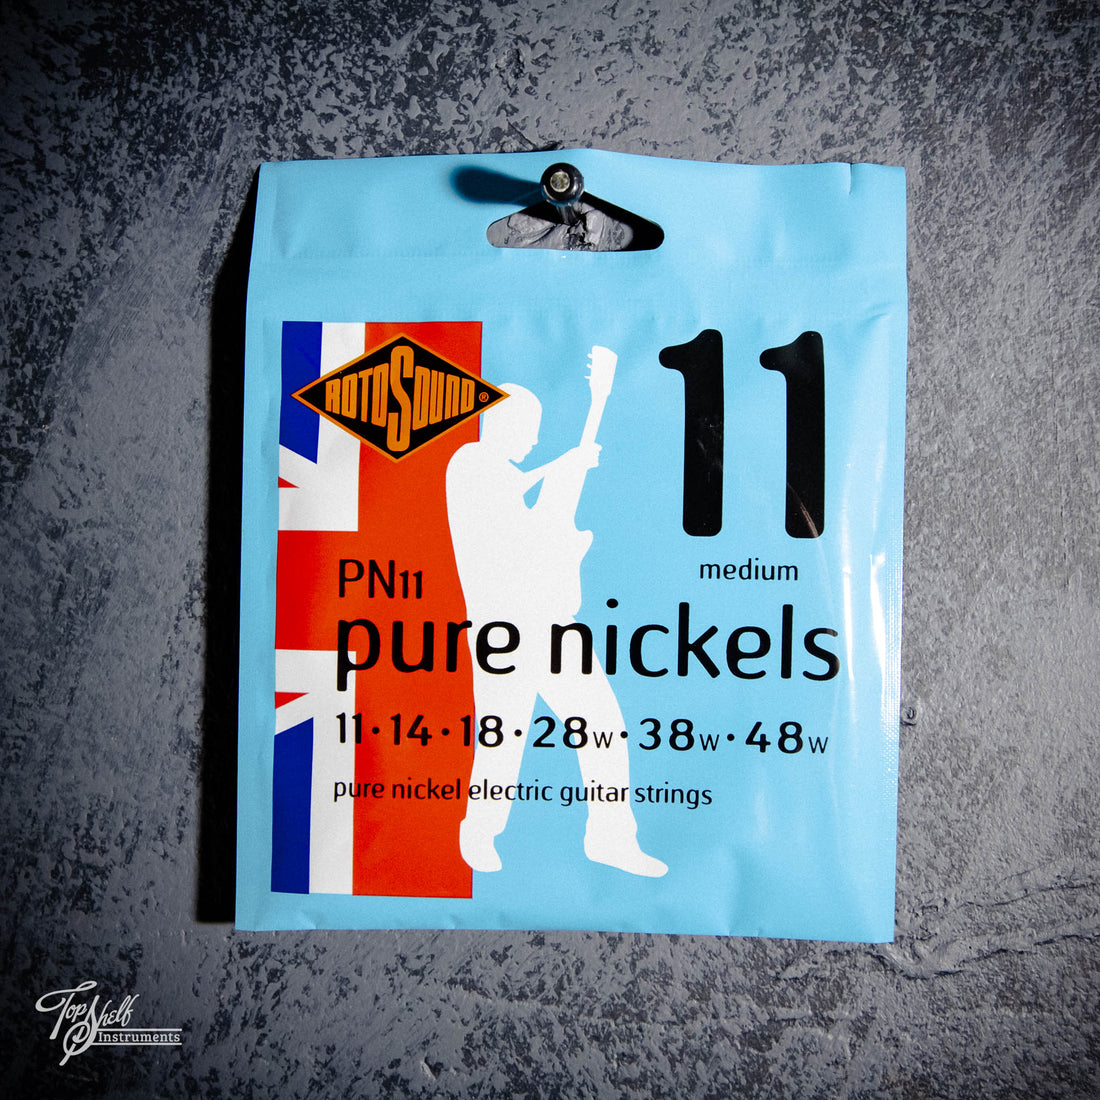 RotoSound PN11 Pure Nickels 11-48 Pure Nickel Electric Guitar Strings